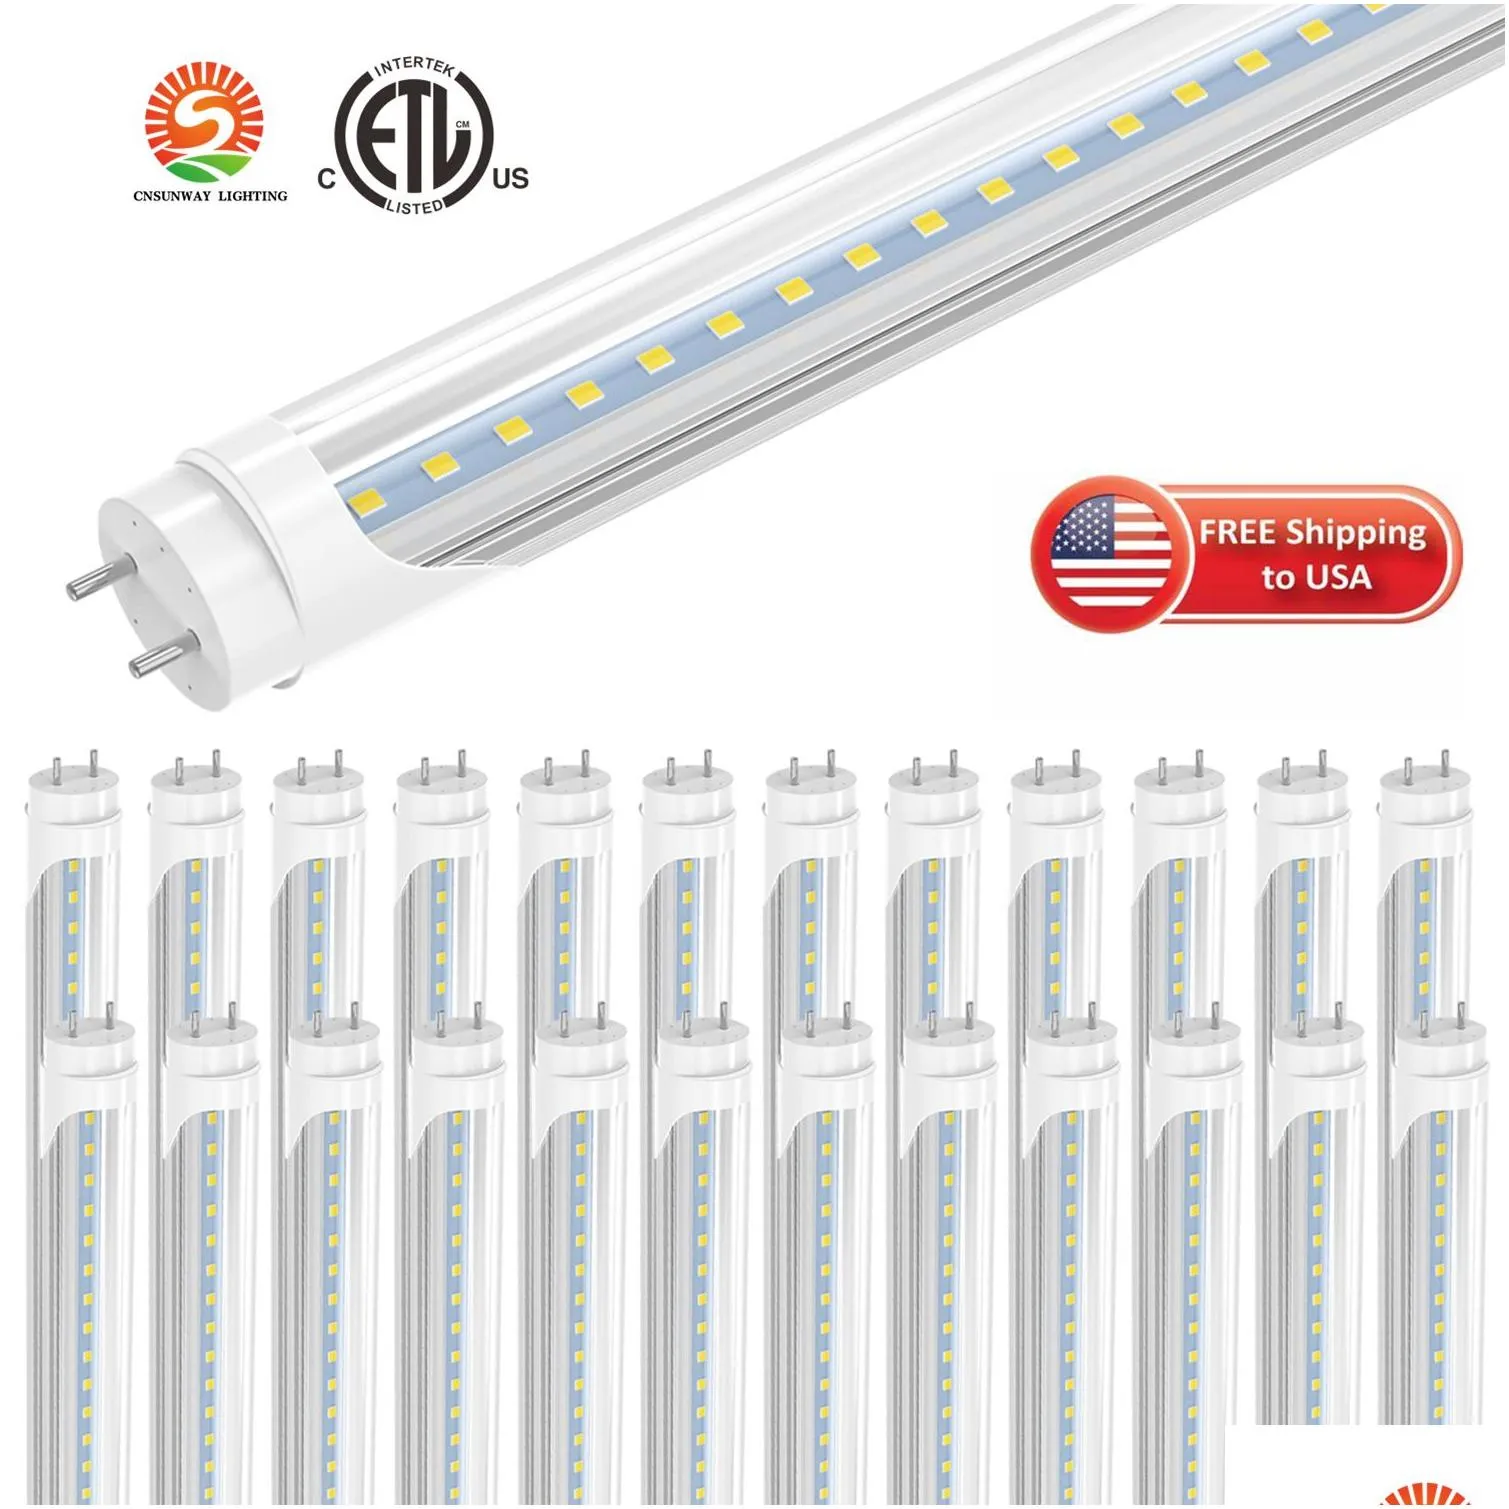 US STOCK 4ft 1.2m T8 Led Tube Lights High Super Bright 22W Warm / Cool White Led Fluorescent Tube Bulbs G13 Bi-pin AC 85-265V replacement for shop garage